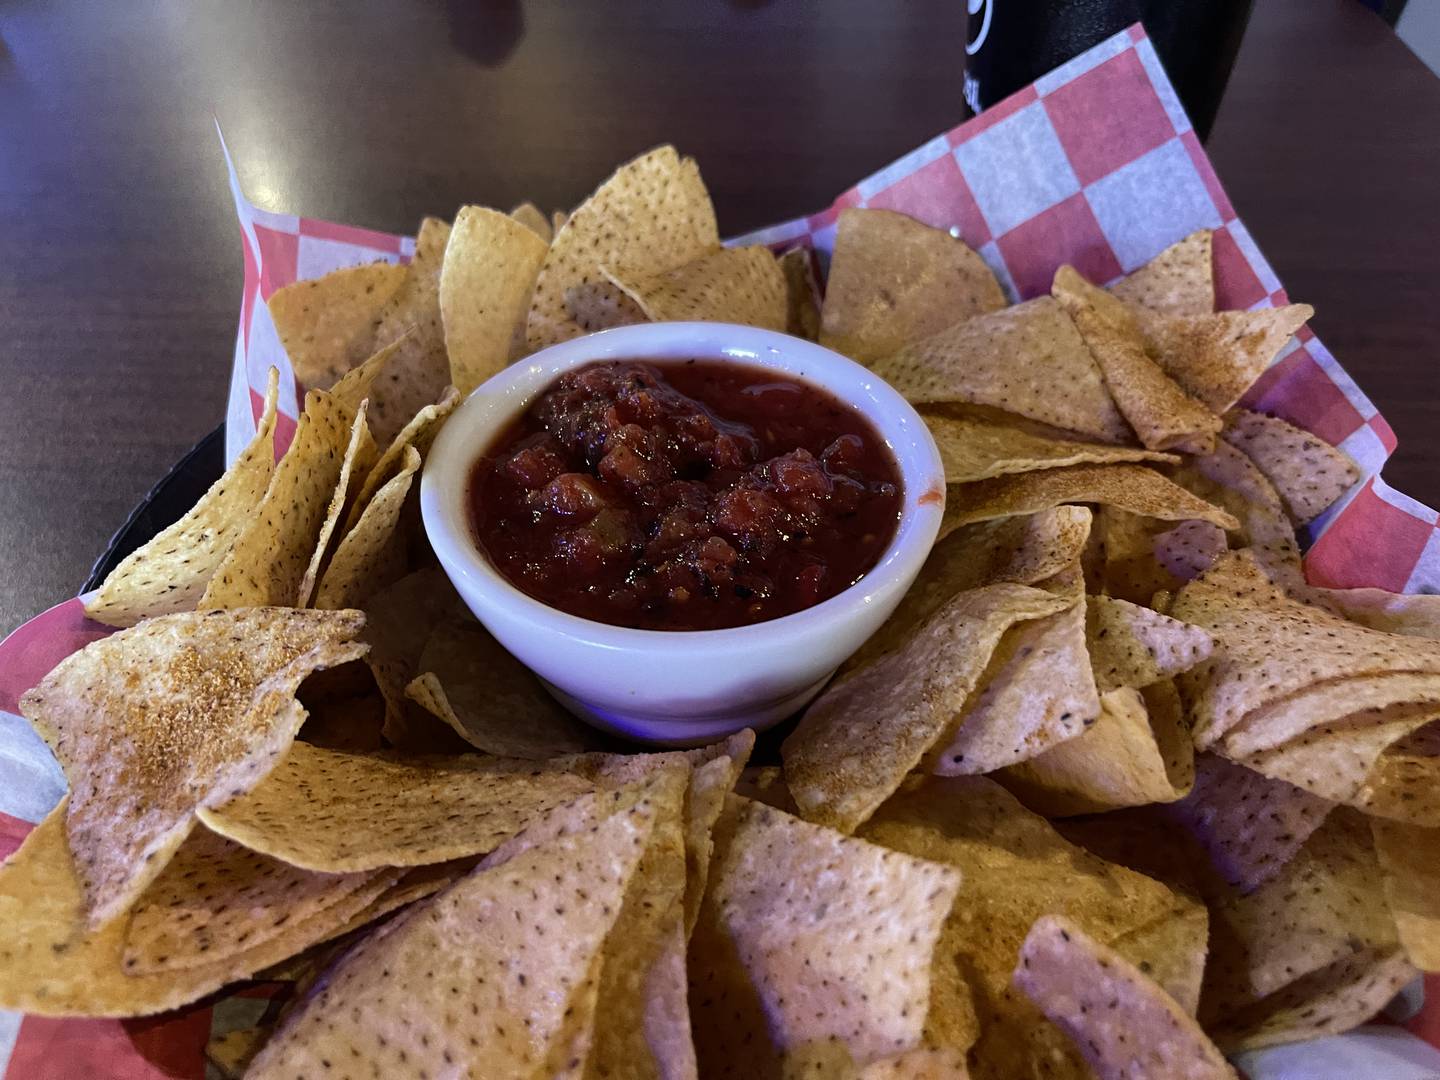 Chips and salsa at Offsides Sports Bar and Grill in Woodstock are crisp and warm, and bring great taste as well. Offsides is a great place to bring friends, as their menu offers a wide variety and has something for everyone.